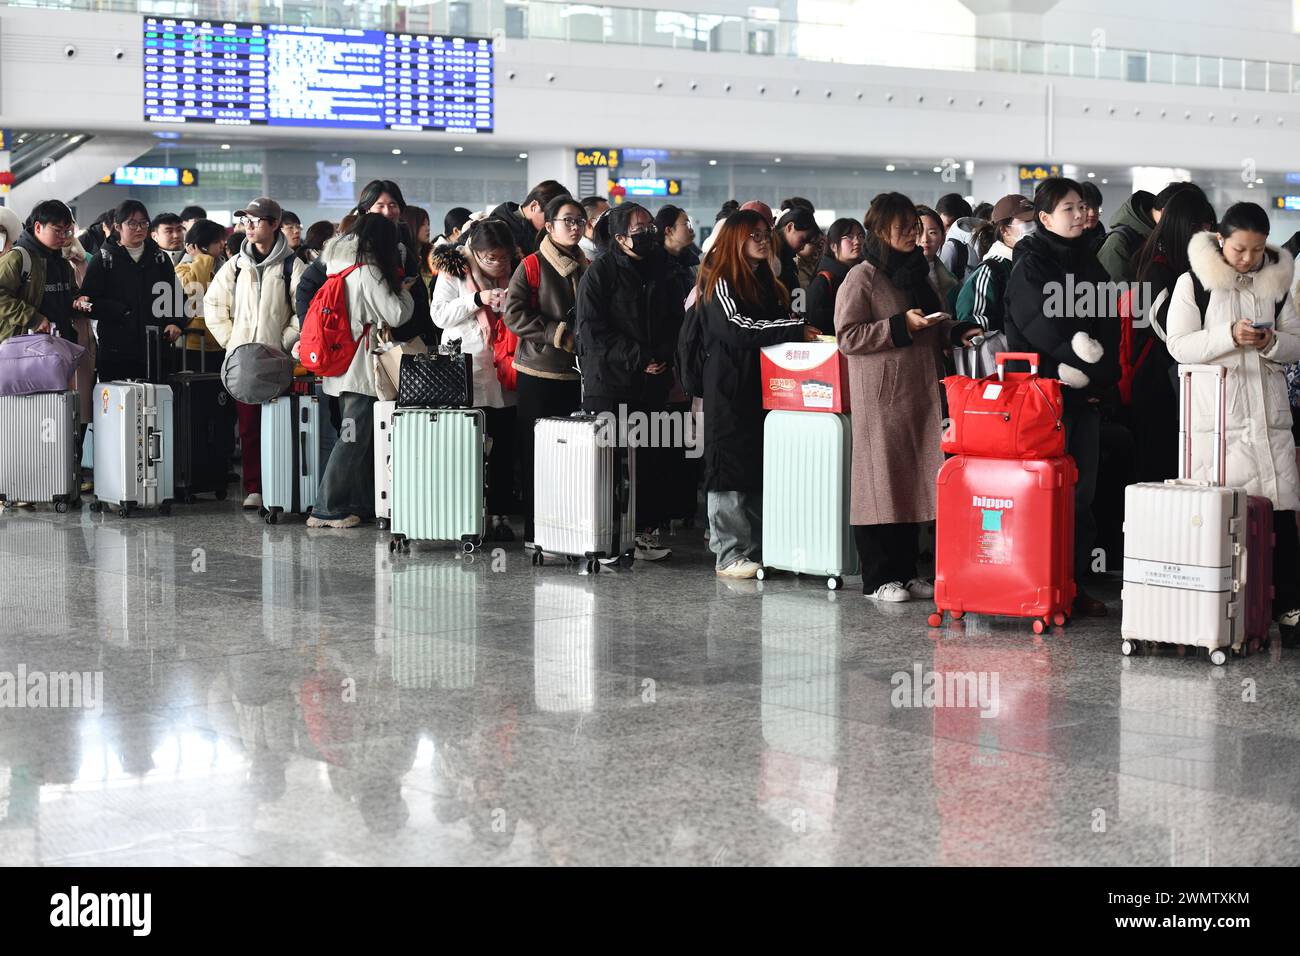 Fuyang West railway station returning passengers after the